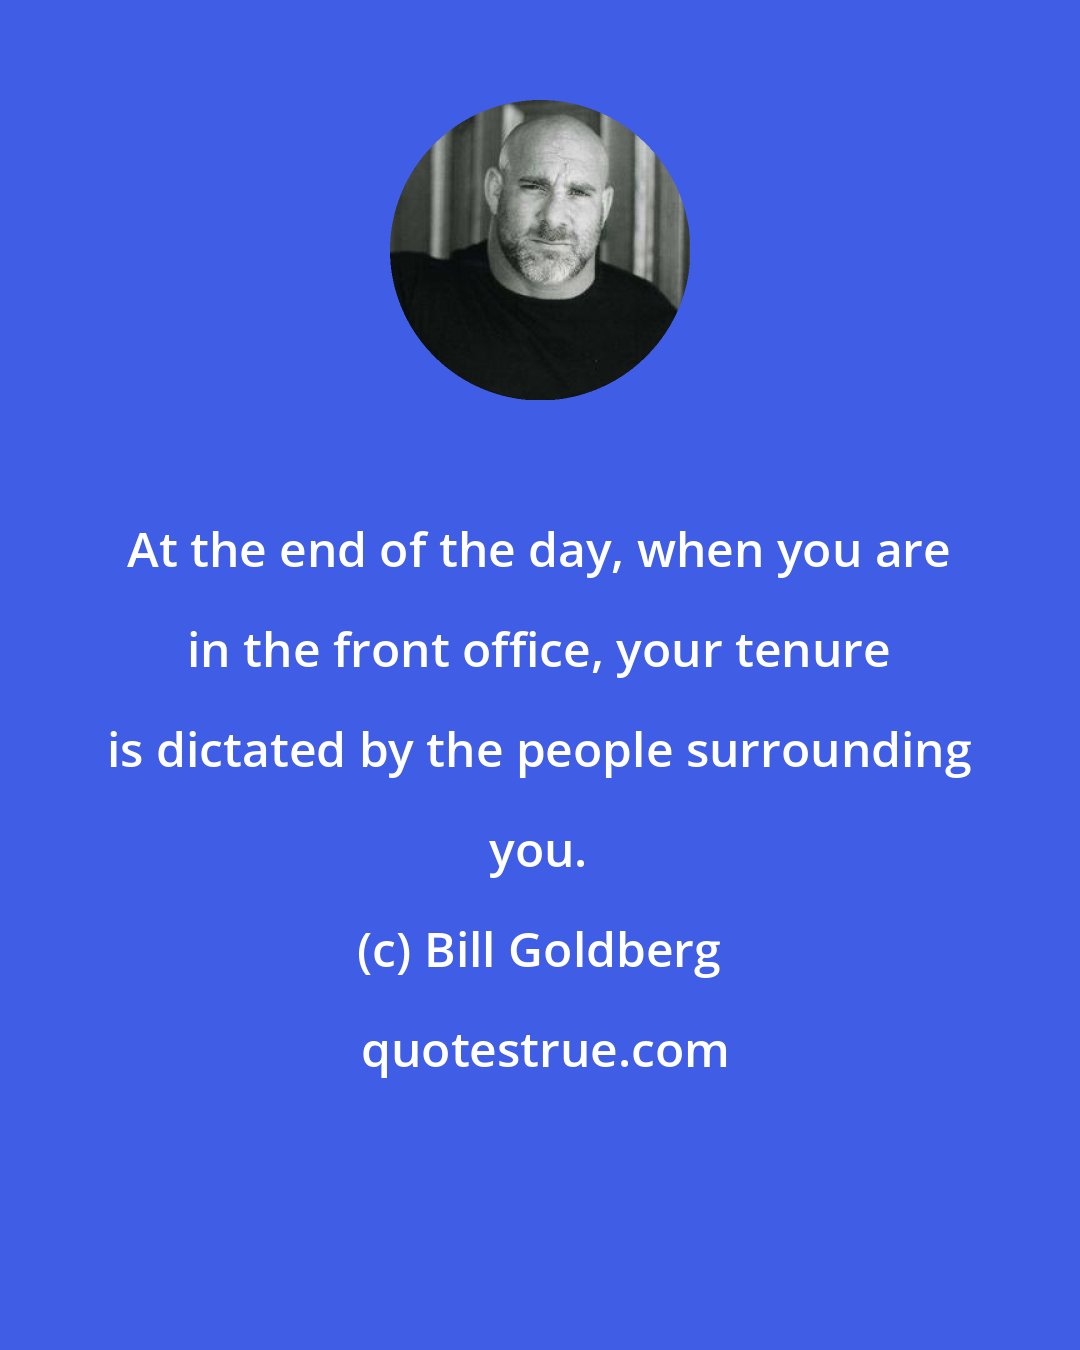 Bill Goldberg: At the end of the day, when you are in the front office, your tenure is dictated by the people surrounding you.